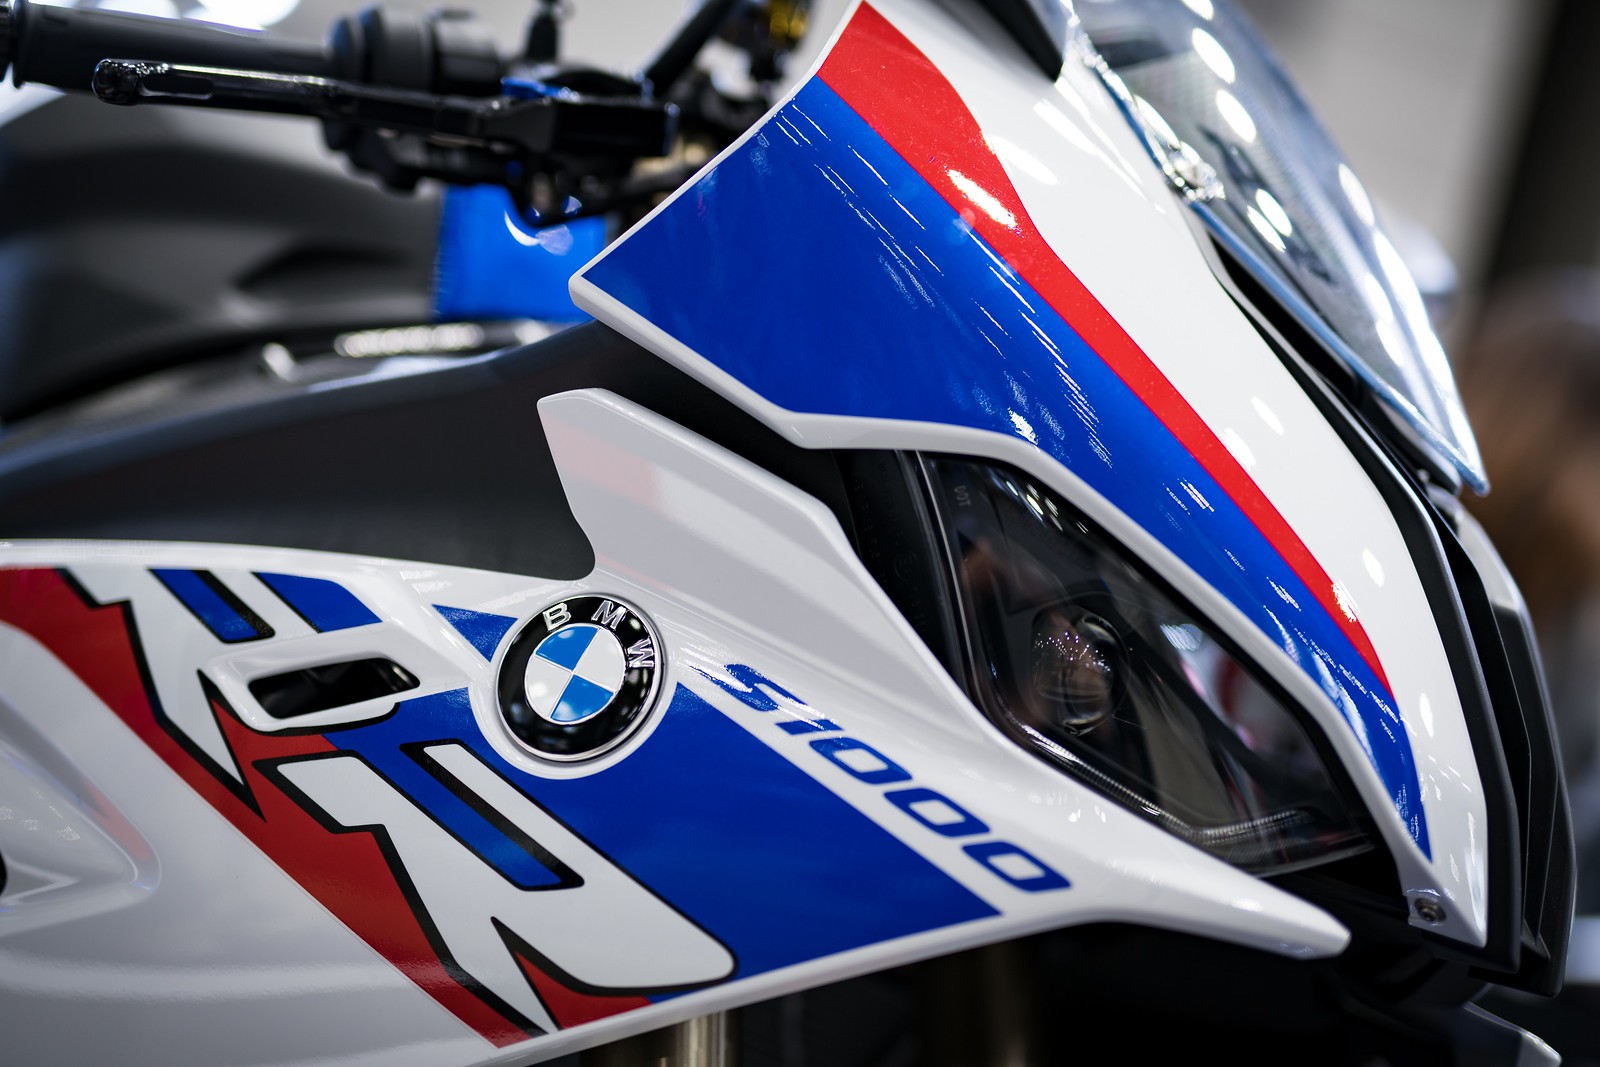 BMW S1000RR 2019 - Tokyo MotorCycle Show